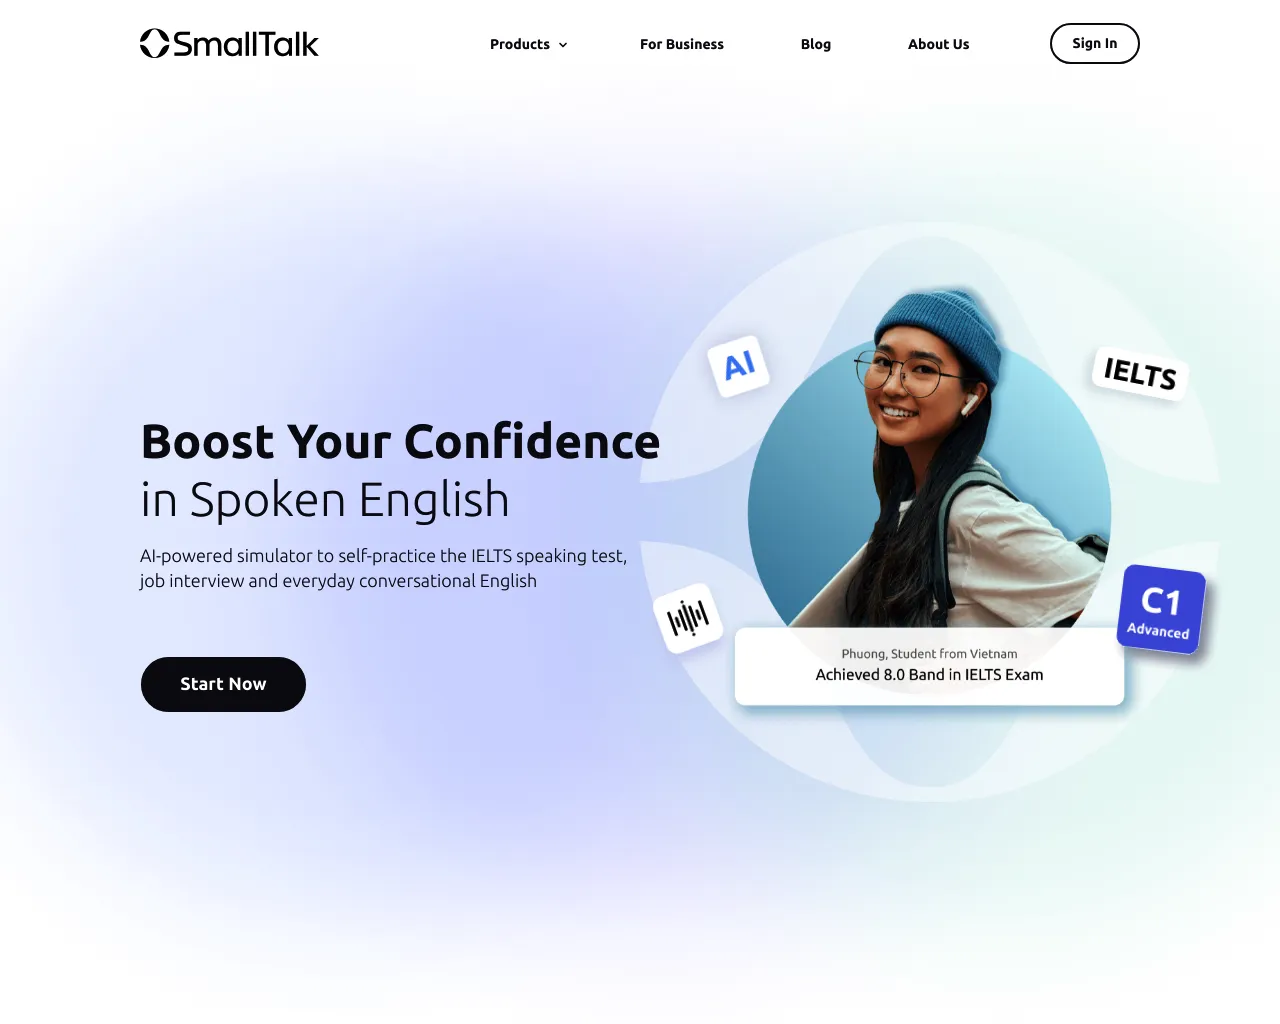 AI-powered Teaching Assistant for Testing and Improving English Speaking Skills